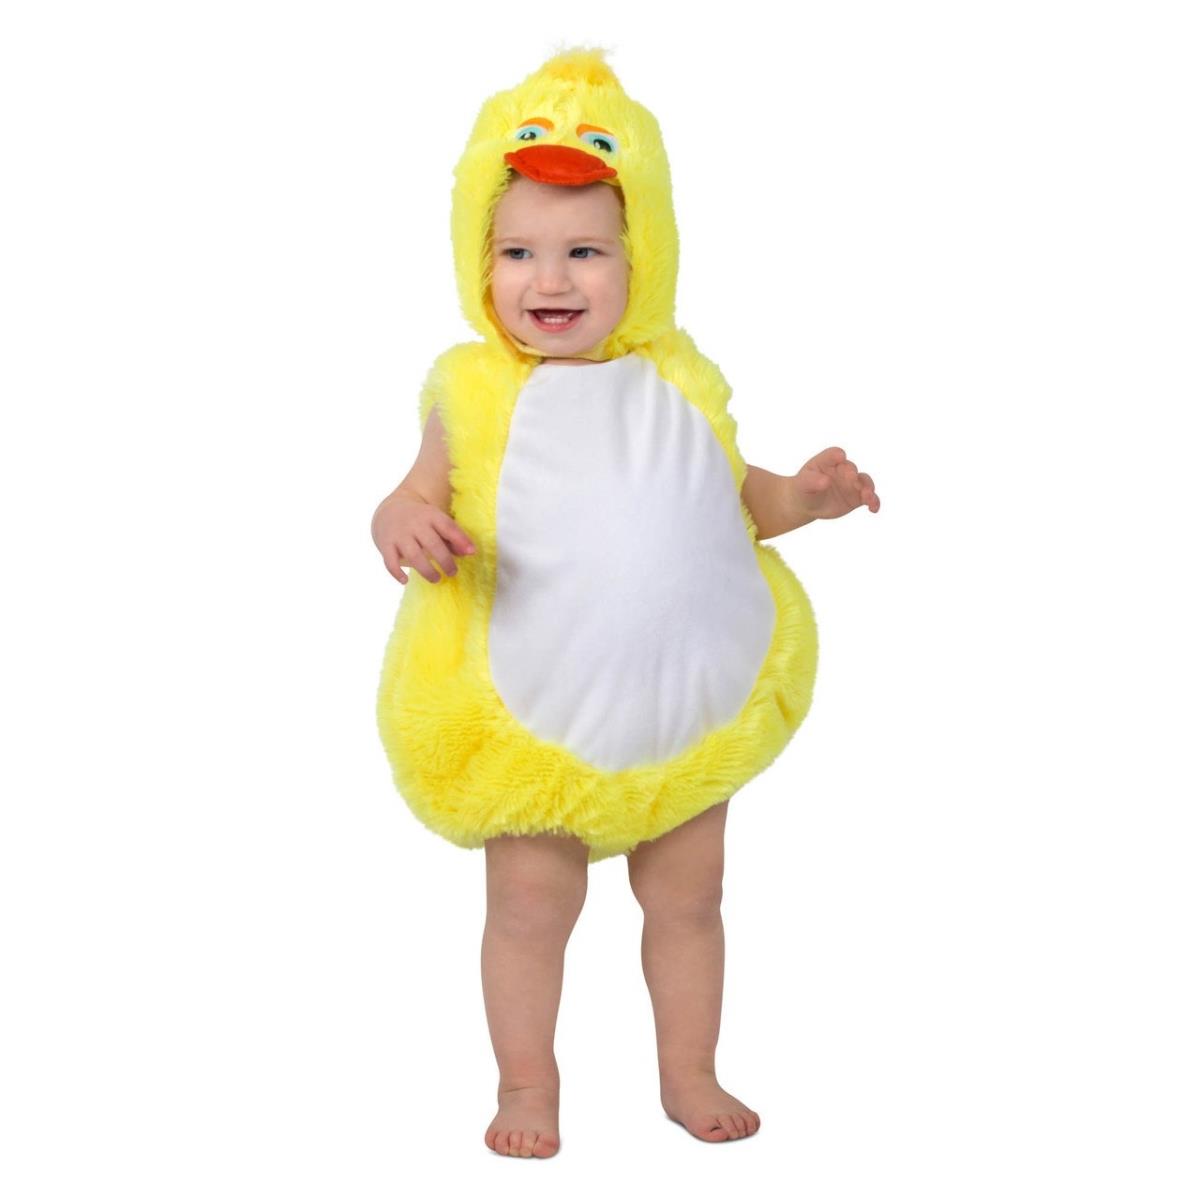 280717 Toddler Plucky Duck Costume, 18 Months-2t